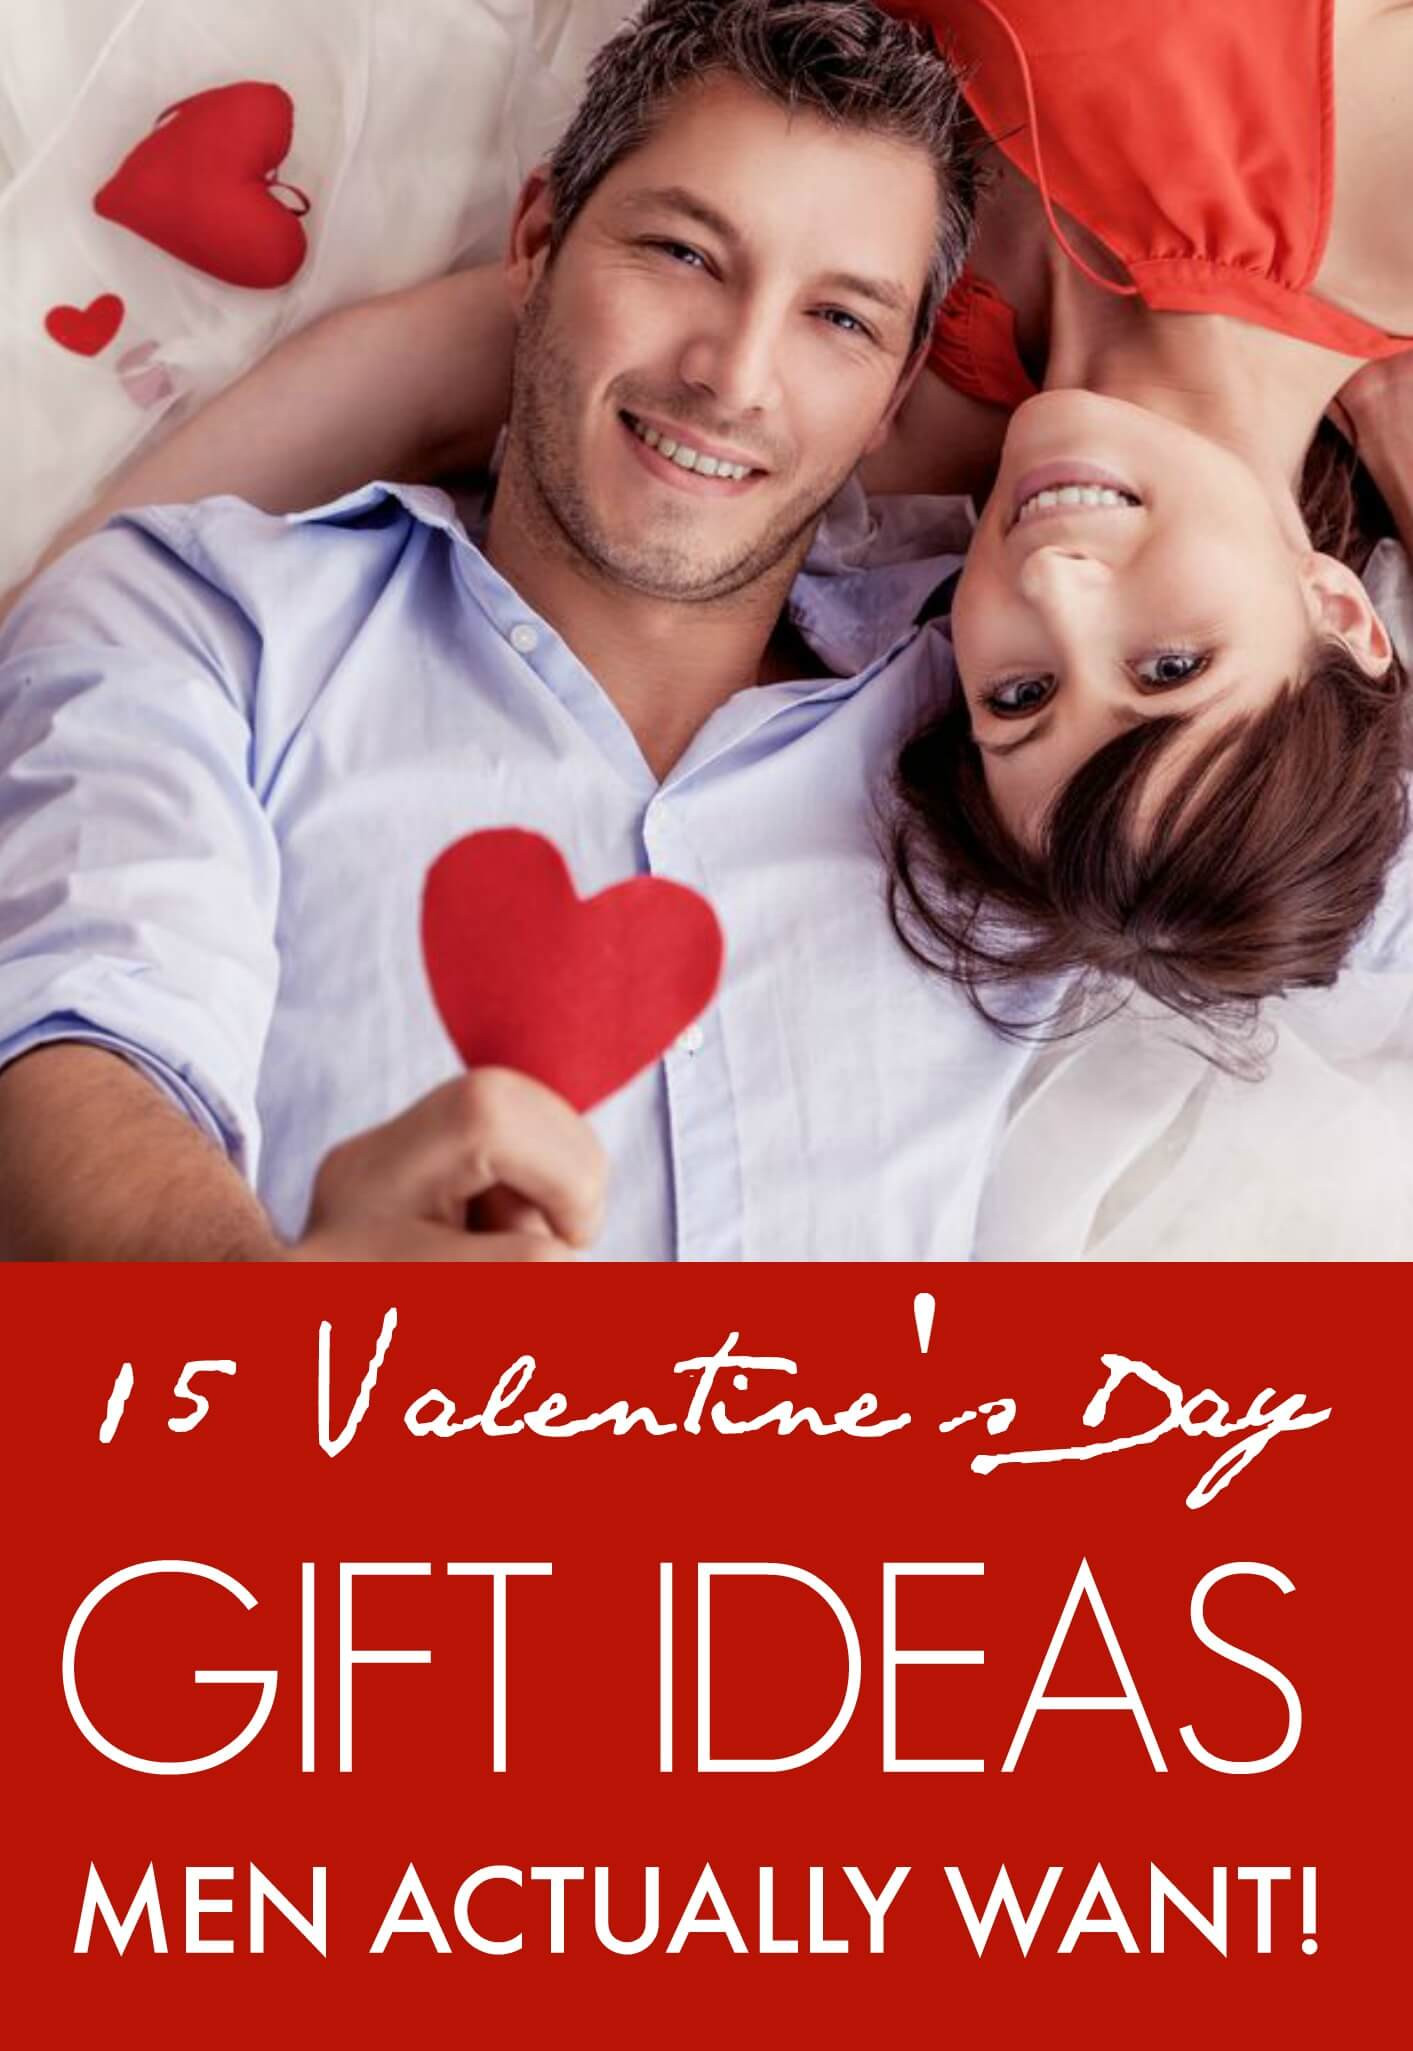 Men Gift Ideas Valentines Day
 15 Valentine’s Day Gift ideas Men Actually Want